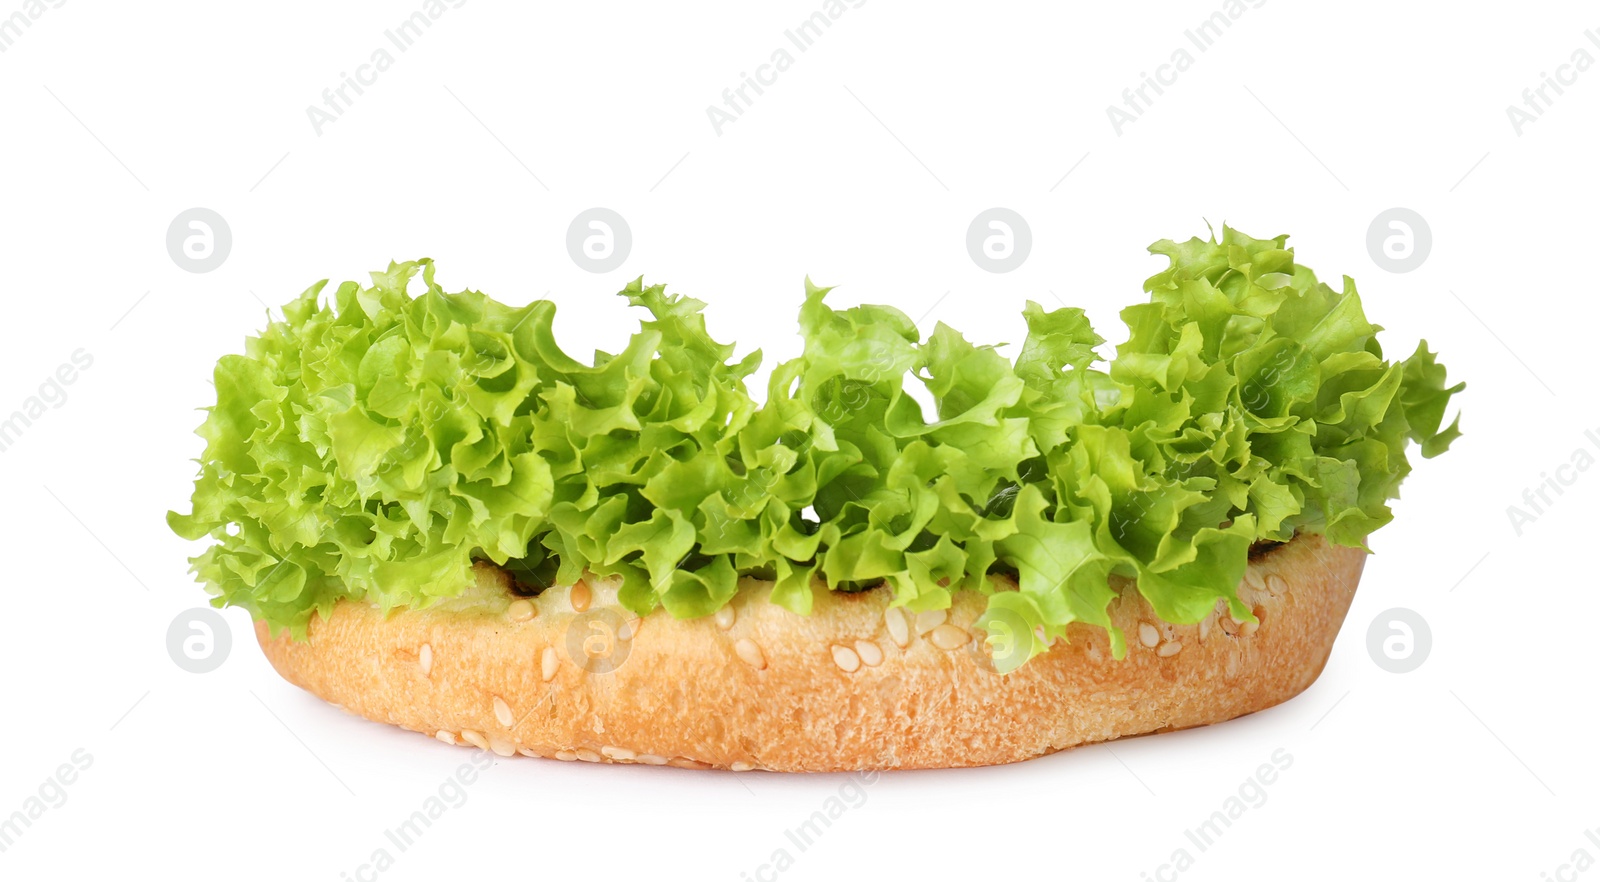 Photo of Burger bun and lettuce isolated on white